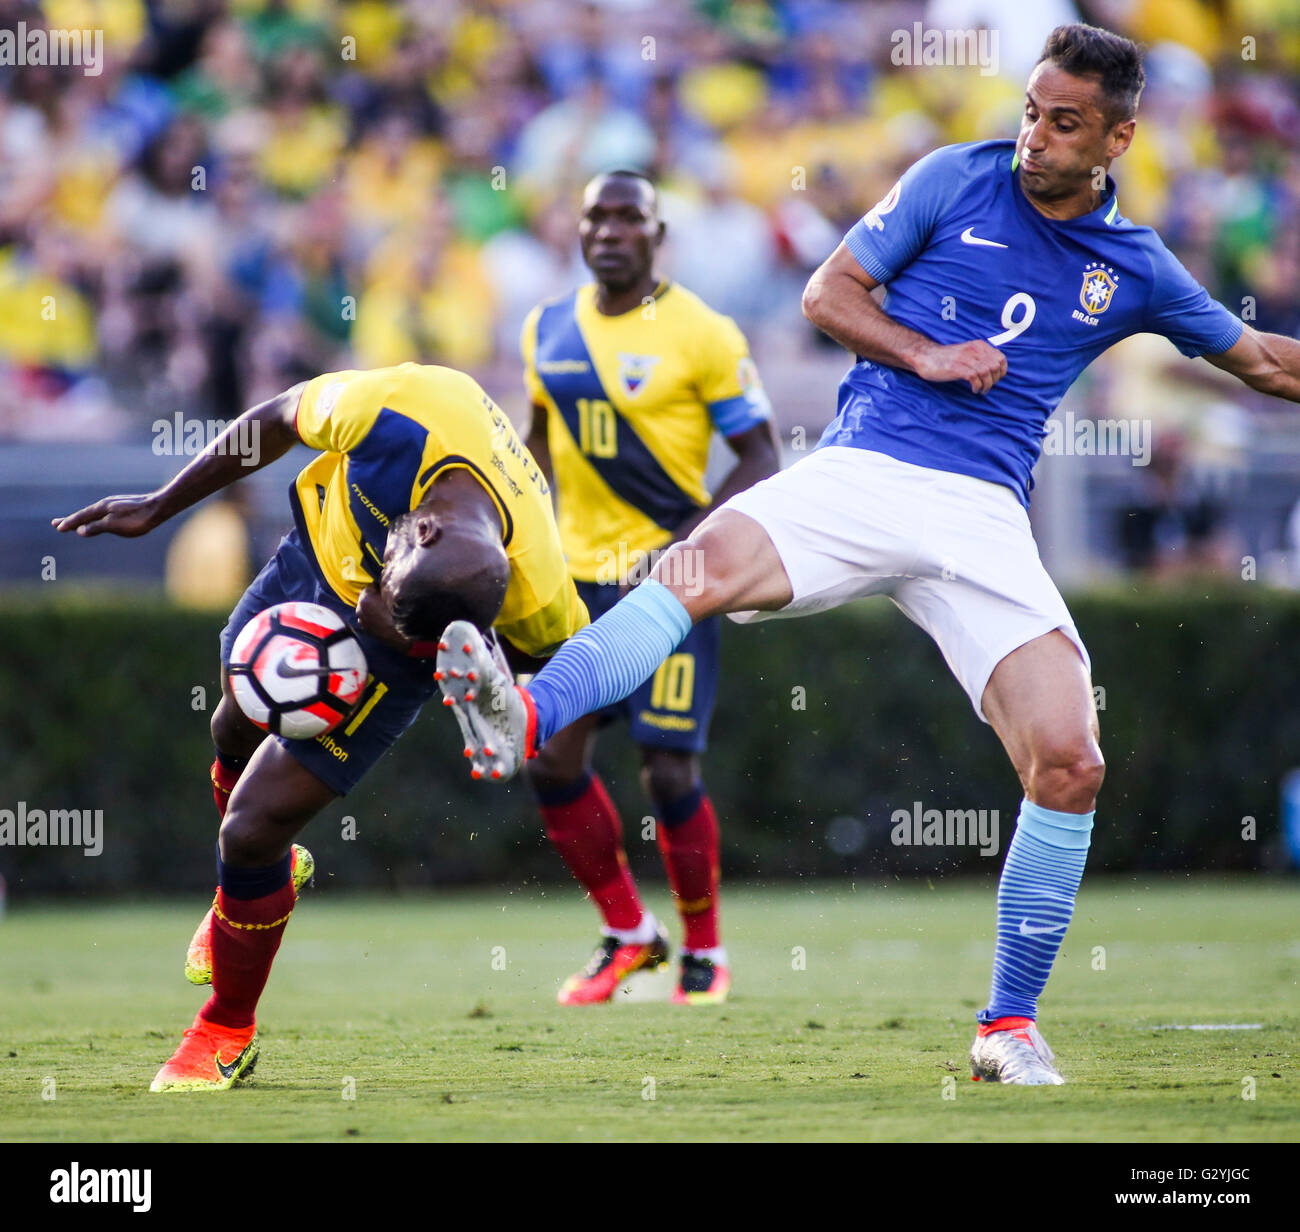 Pasadena, USA. 4th June, 2016. Gabriel Achilier (L) of Ecuador vies with Jonas of Brazil during their 2016 Copa America Centenario Group B match in Pasadena, the United States, June 4, 2016. The match ended with a 0-0 draw. © Zhao Hanrong/Xinhua/Alamy Live News Stock Photo